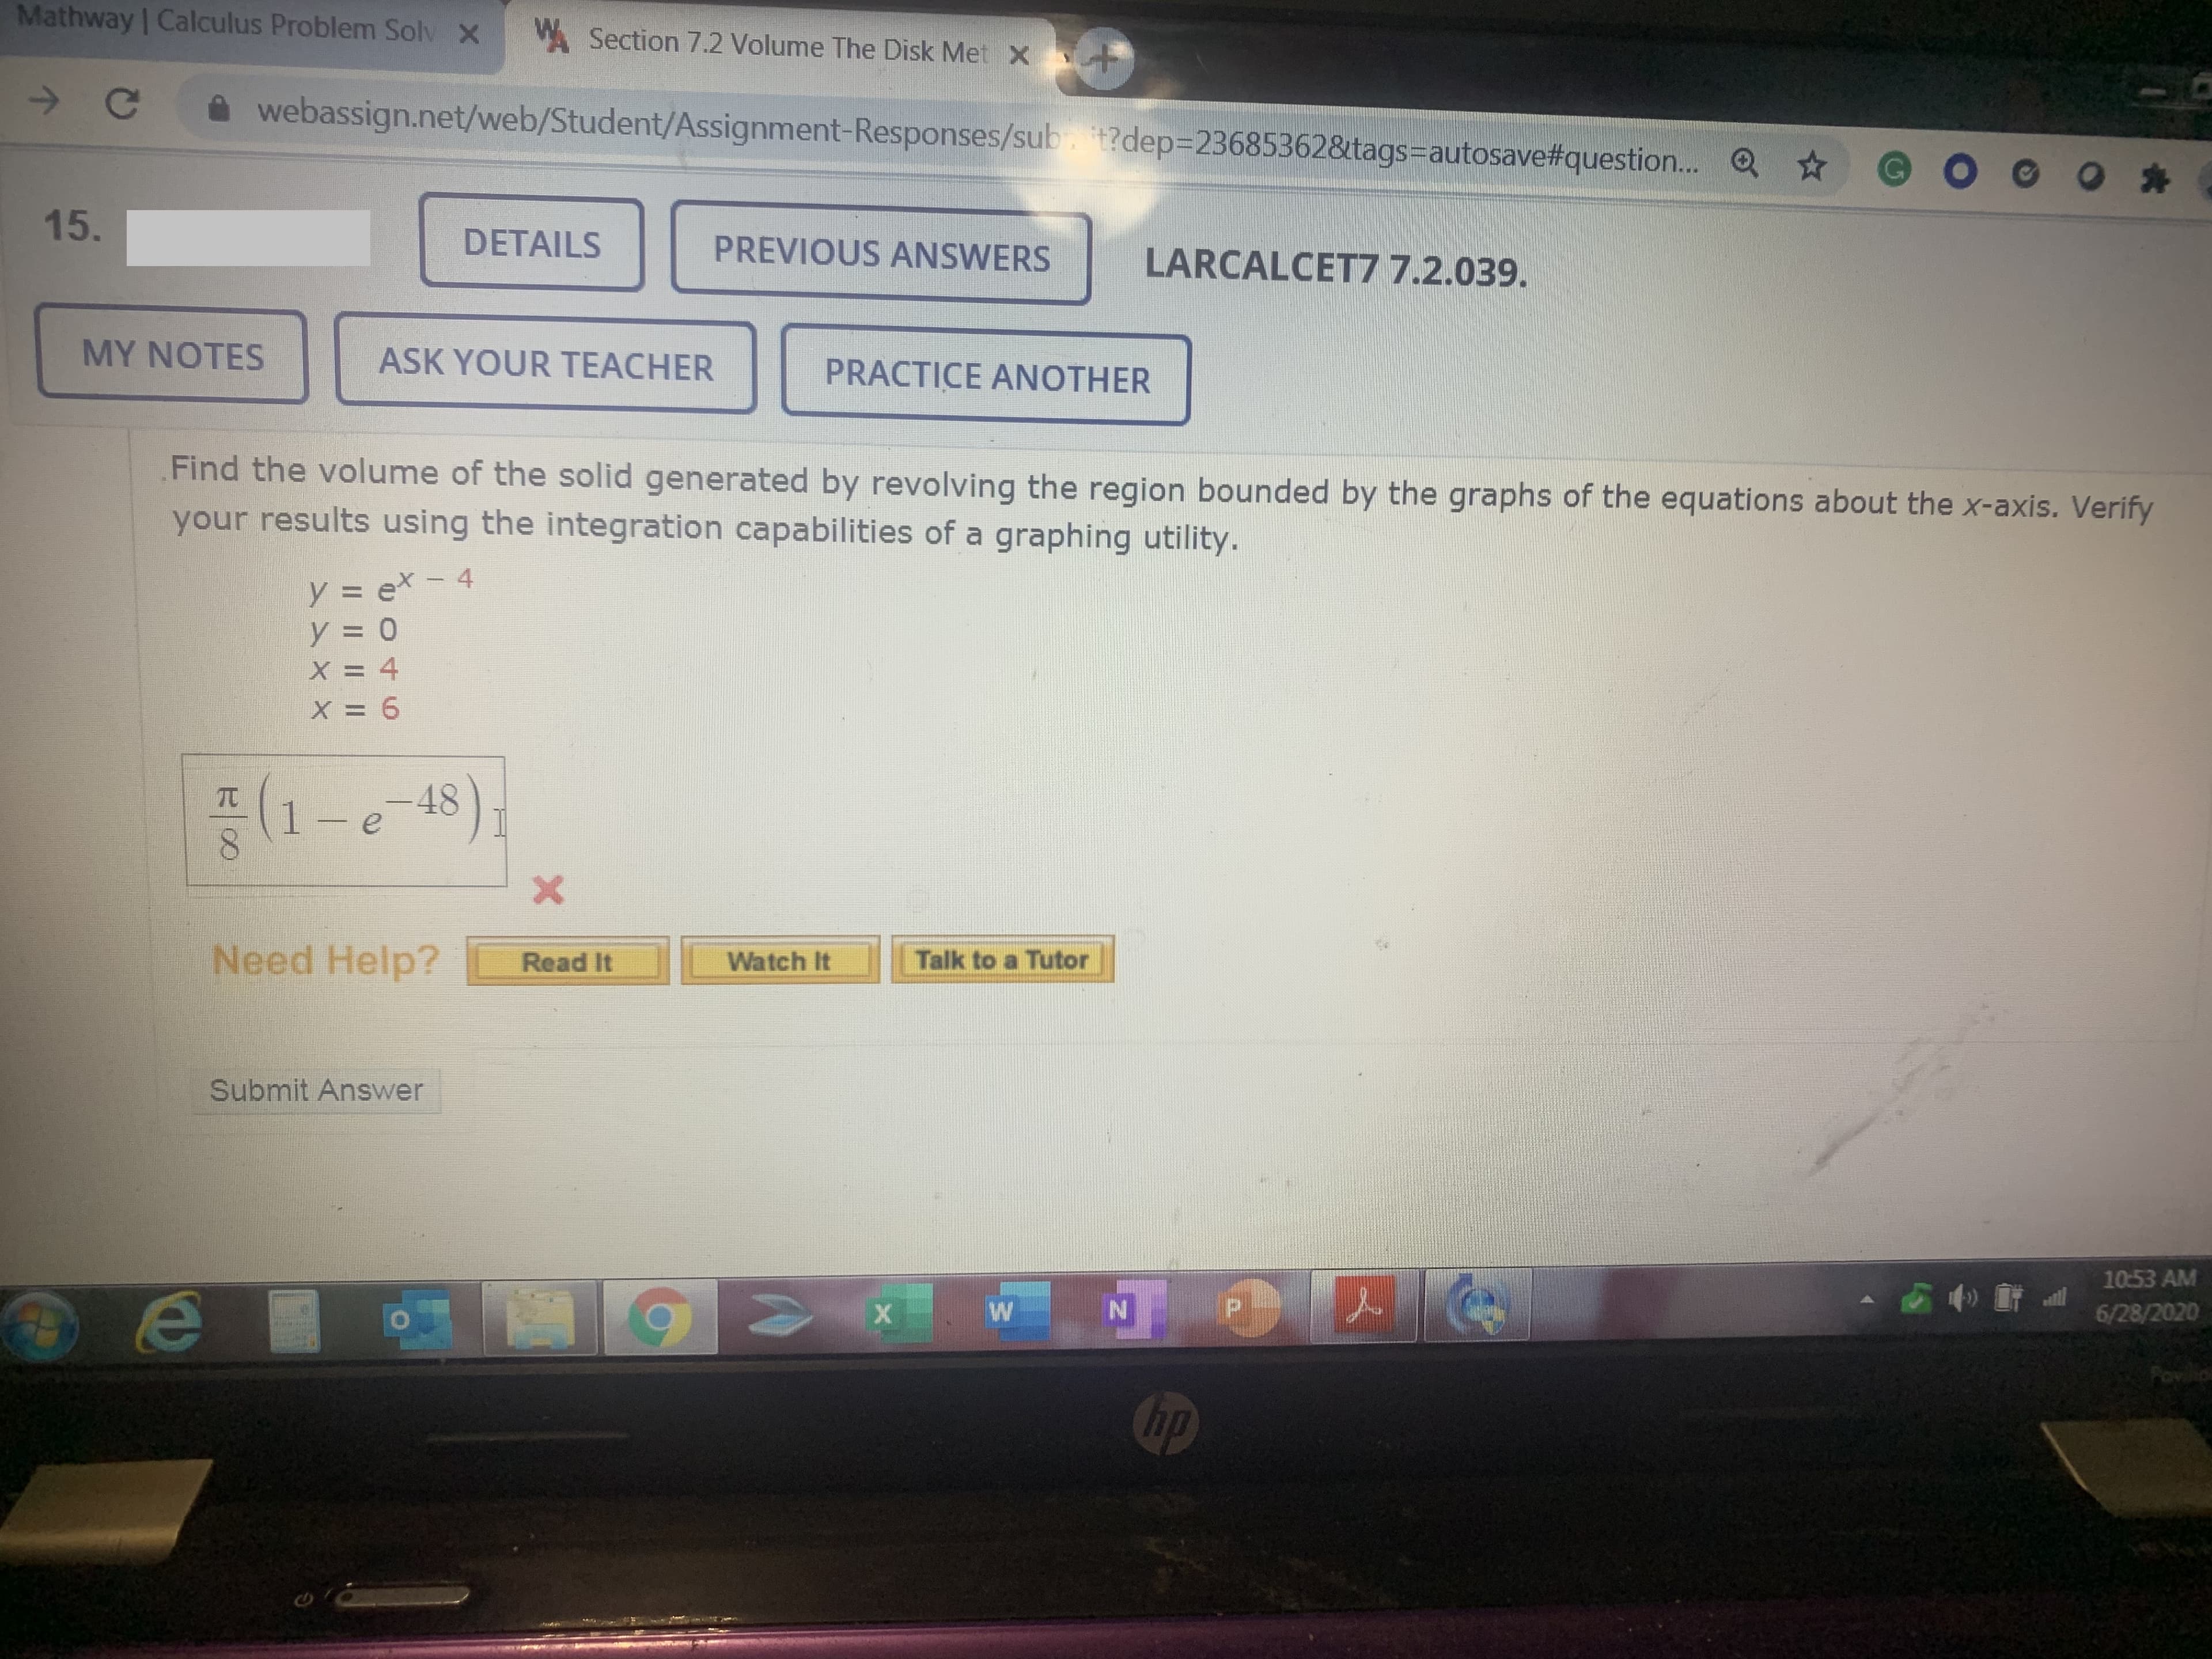 Mathway | Calculus Problem Solv X
A Section 7.2 Volume The Disk Met X +
webassign.net/web/Student/Assignment-Responses/sub. t?dep=23685362&tags-Dautosave#question. O ☆
15.
DETAILS
PREVIOUS ANSWERS
LARCALCET77.2.039.
MY NOTES
ASK YOUR TEACHER
PRACTICE ANOTHER
Find the volume of the solid generated by revolving the region bounded by the graphs of the equations about the x-axis. Verify
your results using the integration capabilities of a graphing utility.
y = ex-4
y = 0
X = 4
X = 6
TC
1-e 48)
Need Help?
Talk to a Tutor
Read It
Watch It
Submit Answer
10:53 AM
6/28/2020
Chp
